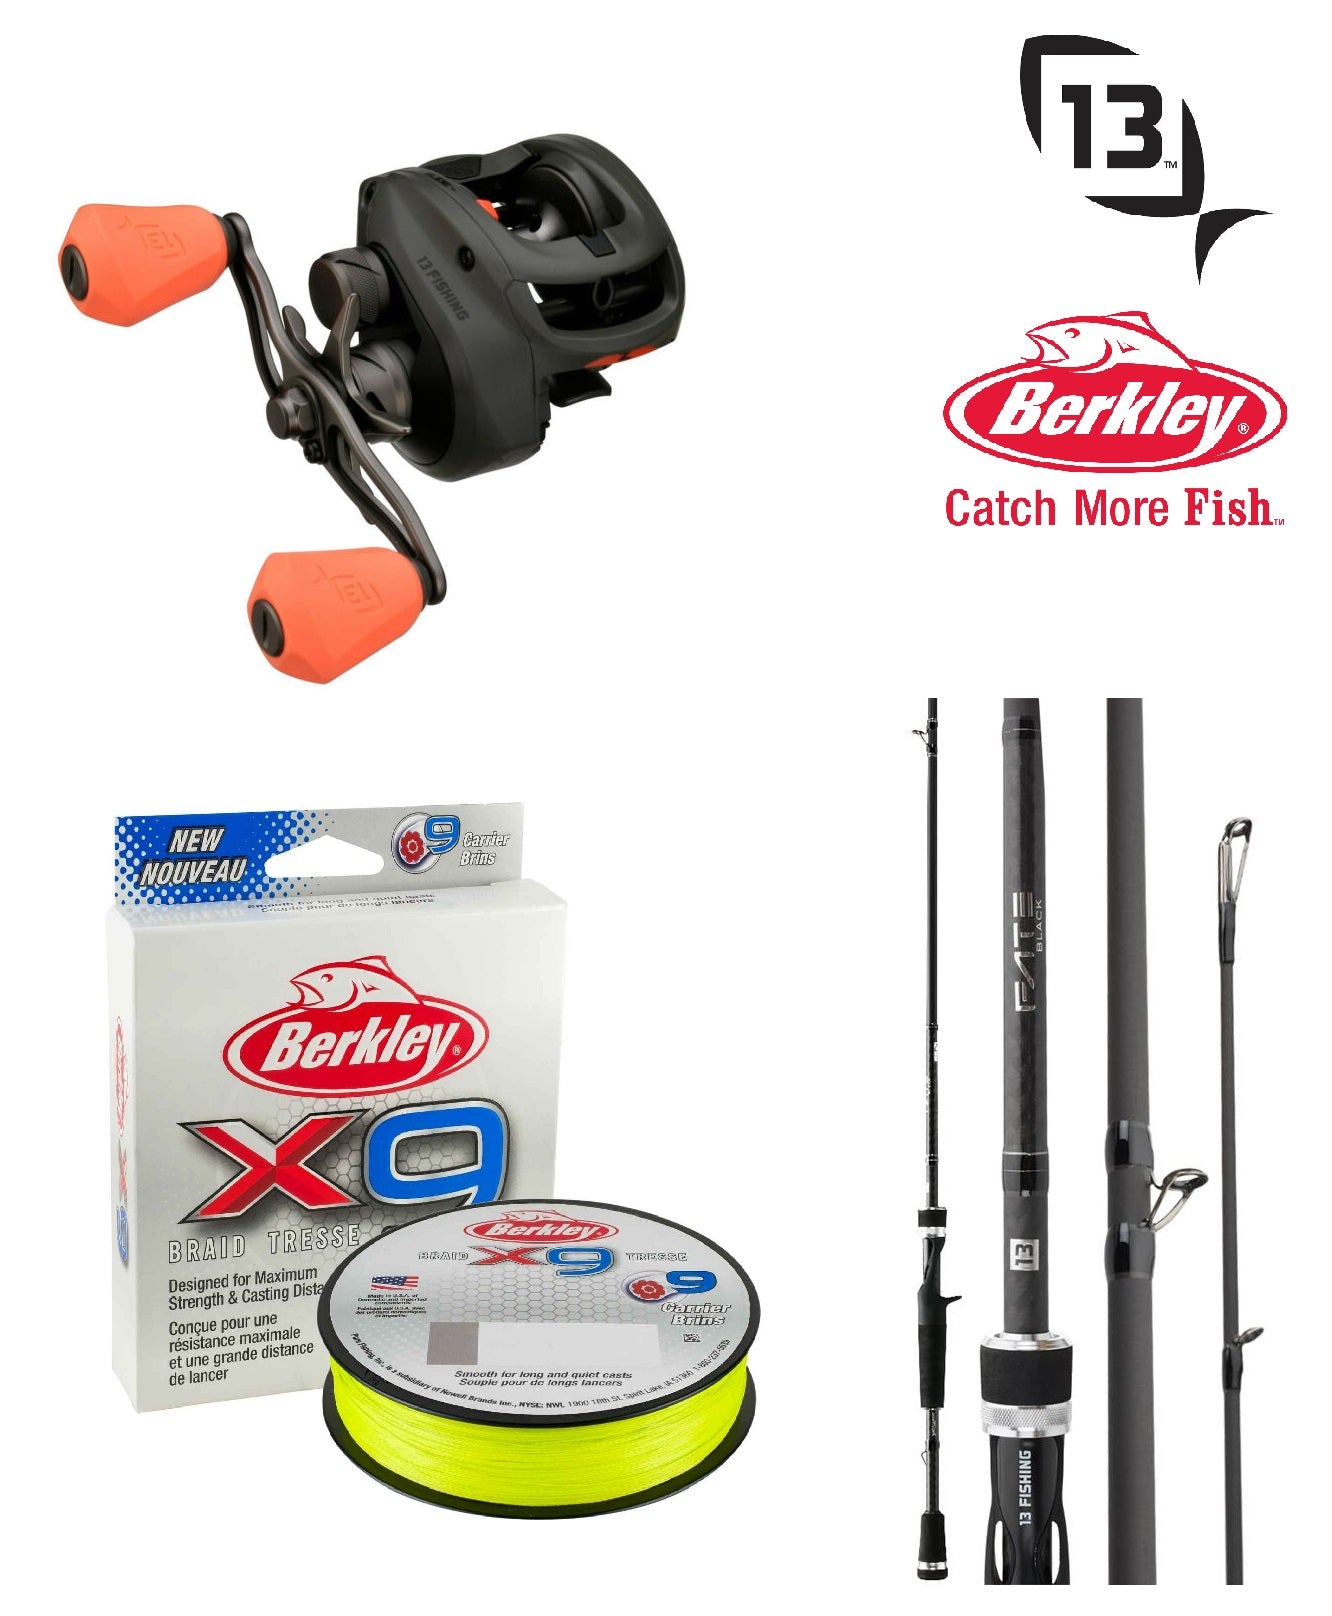 Shop 13 Fishing Rods and Reels